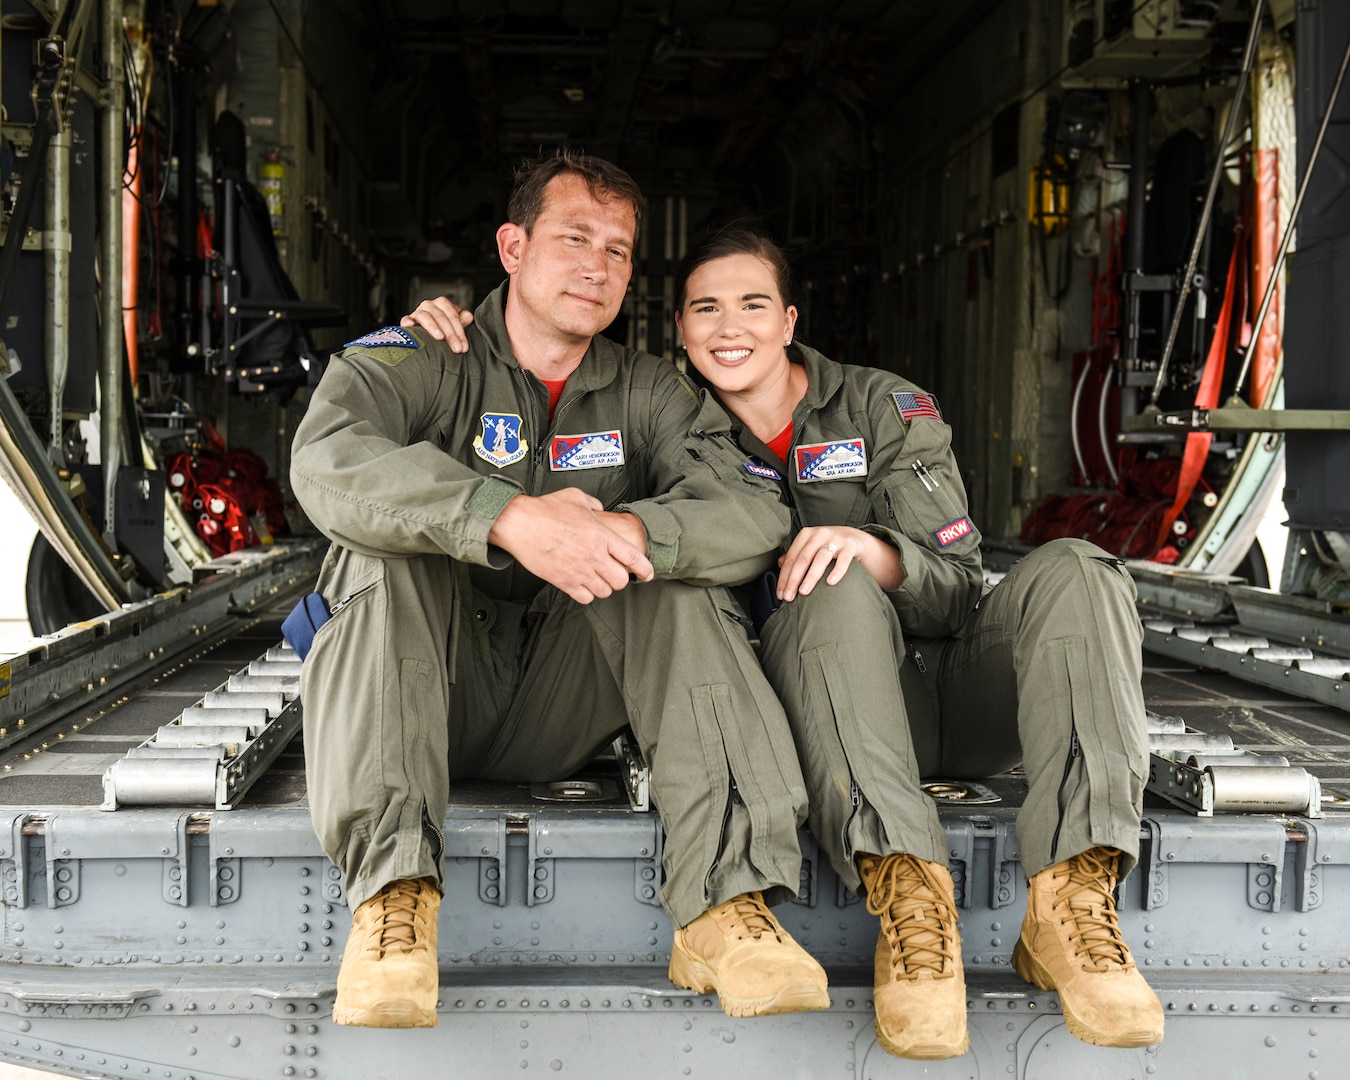 Chief Master Sgt. Gary Hendrickson and Senior Airman Ashlyn Hendrickson, both loadmasters assigned to the 154th Training Squadron, inside a C-130H at Little Rock Air Force Base, Arkansas. The father-daughter duo love flying and provide vital support in their role as C-130H loadmasters.